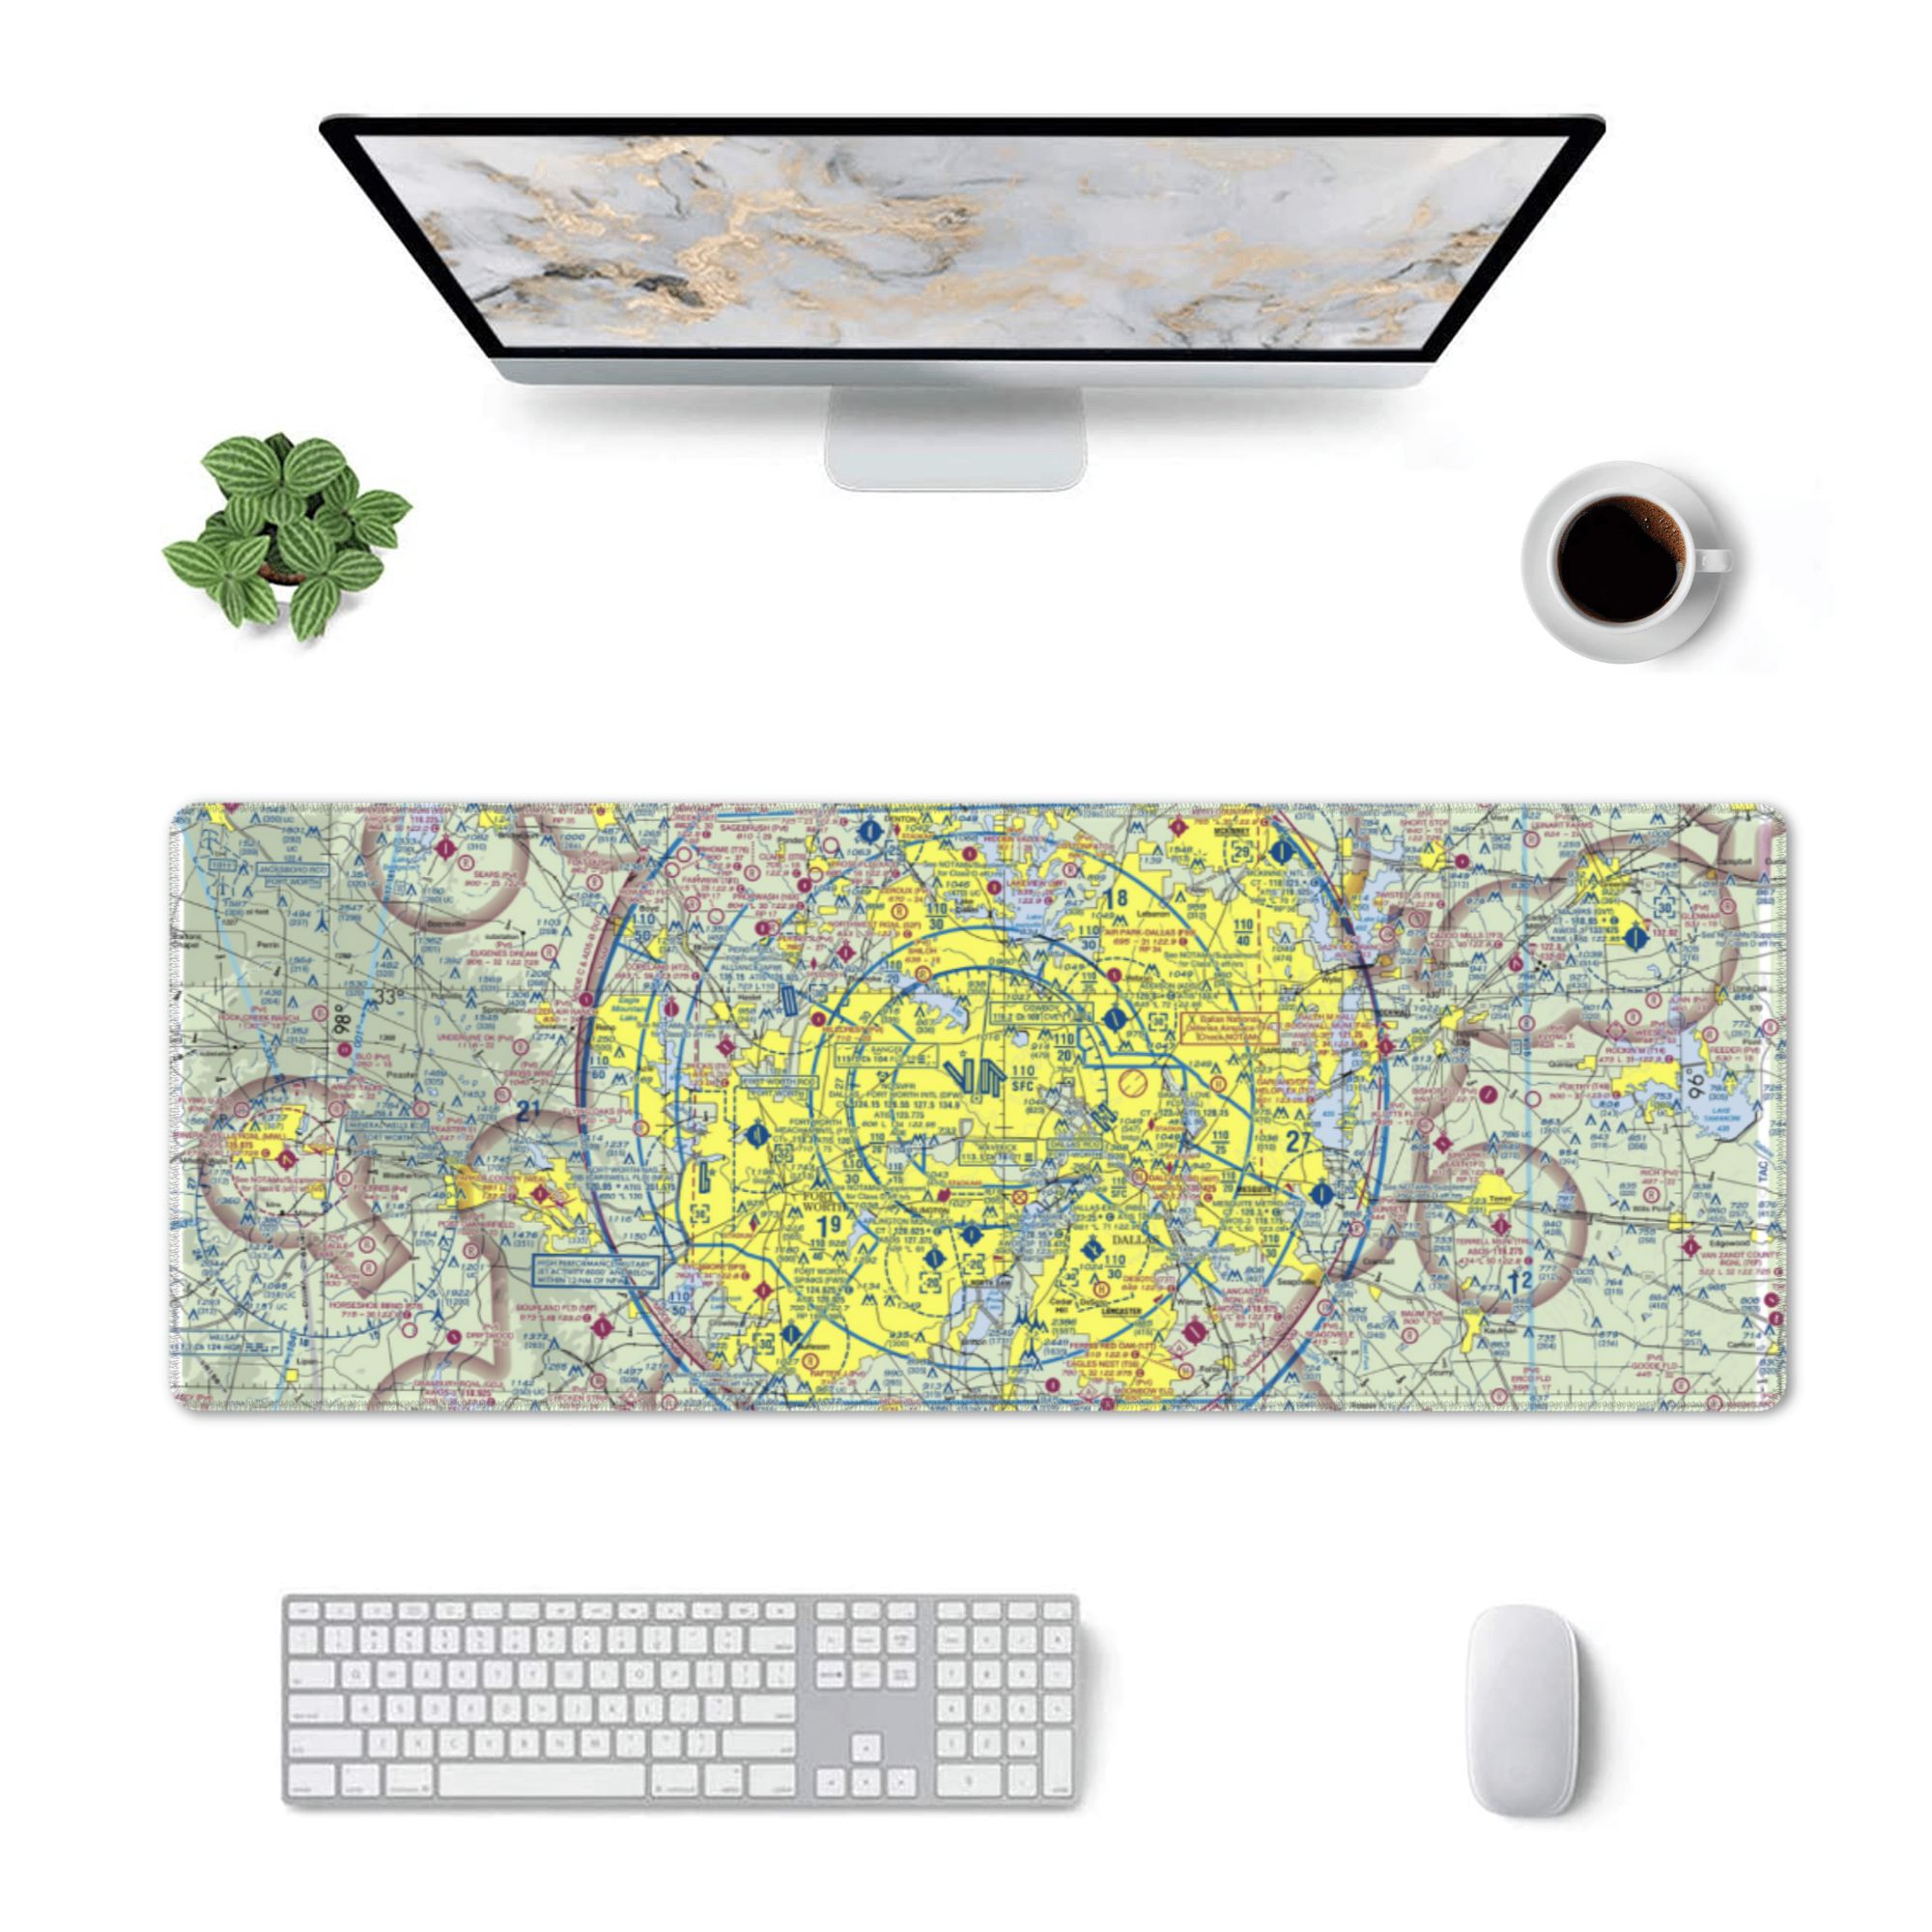 Dallas Ft Worth sectional chart large mouse pad. Best gift for pilot crew and aviation geeks.